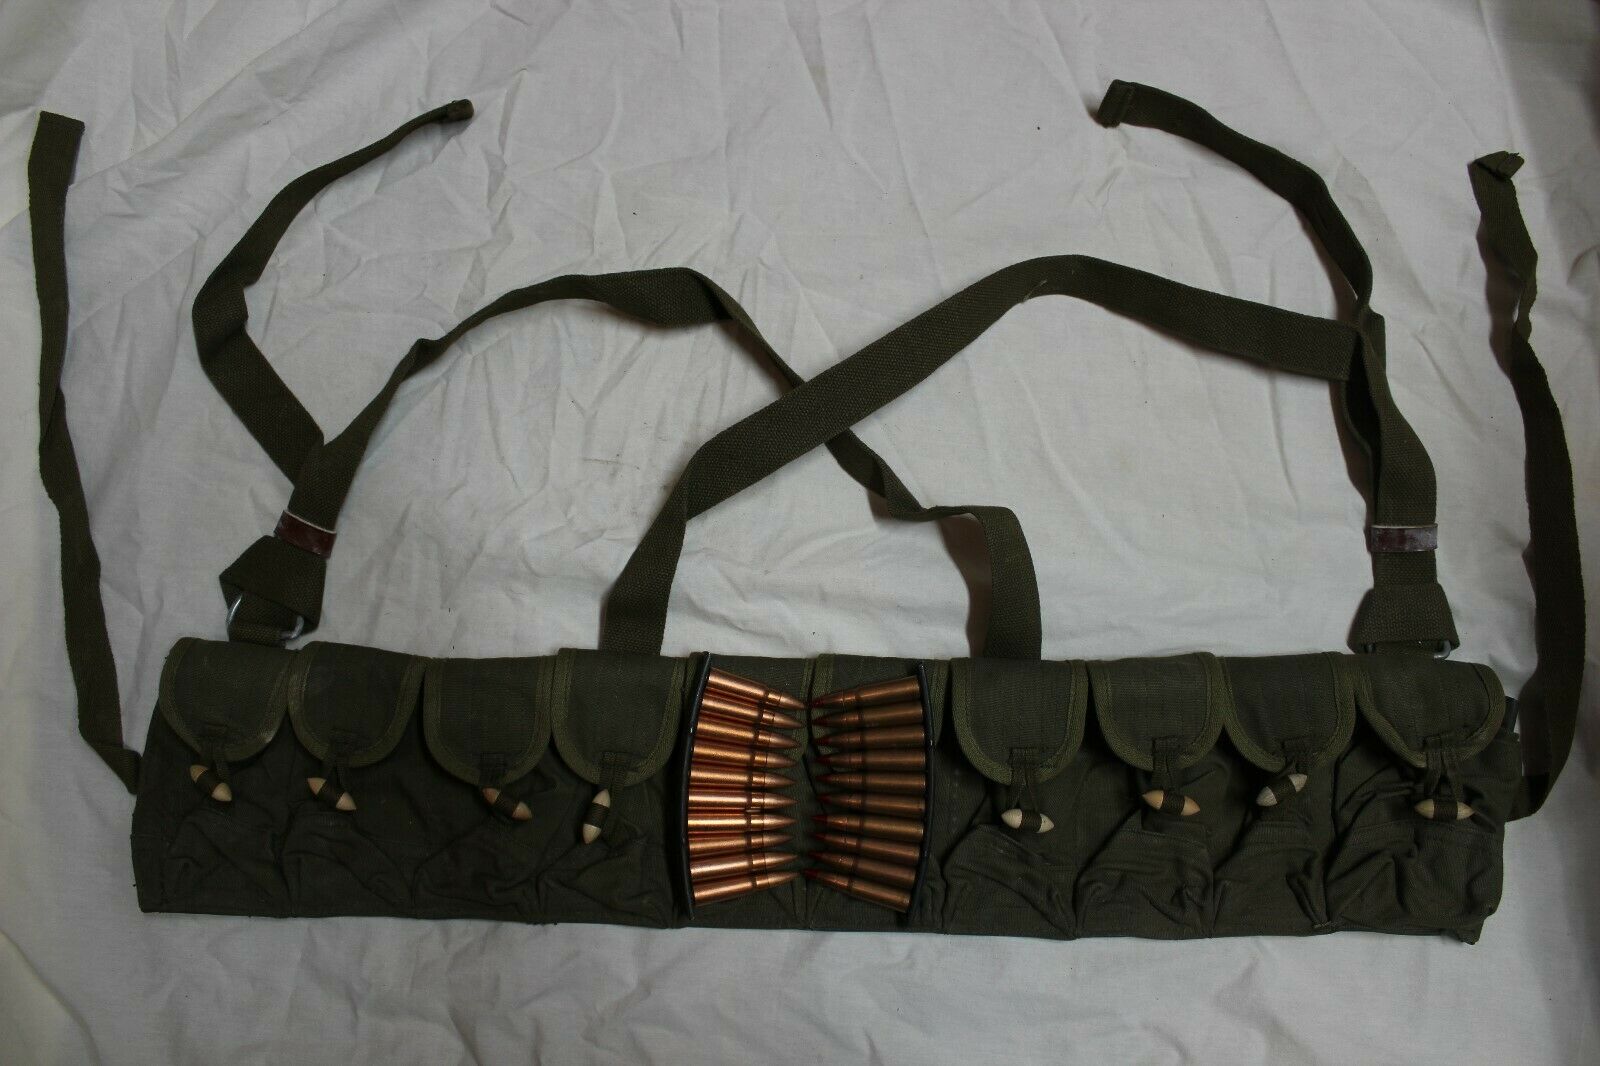 Original Chinese Military Sks Type 56 Semi Ammo Chest-rig Bandolier Pouch